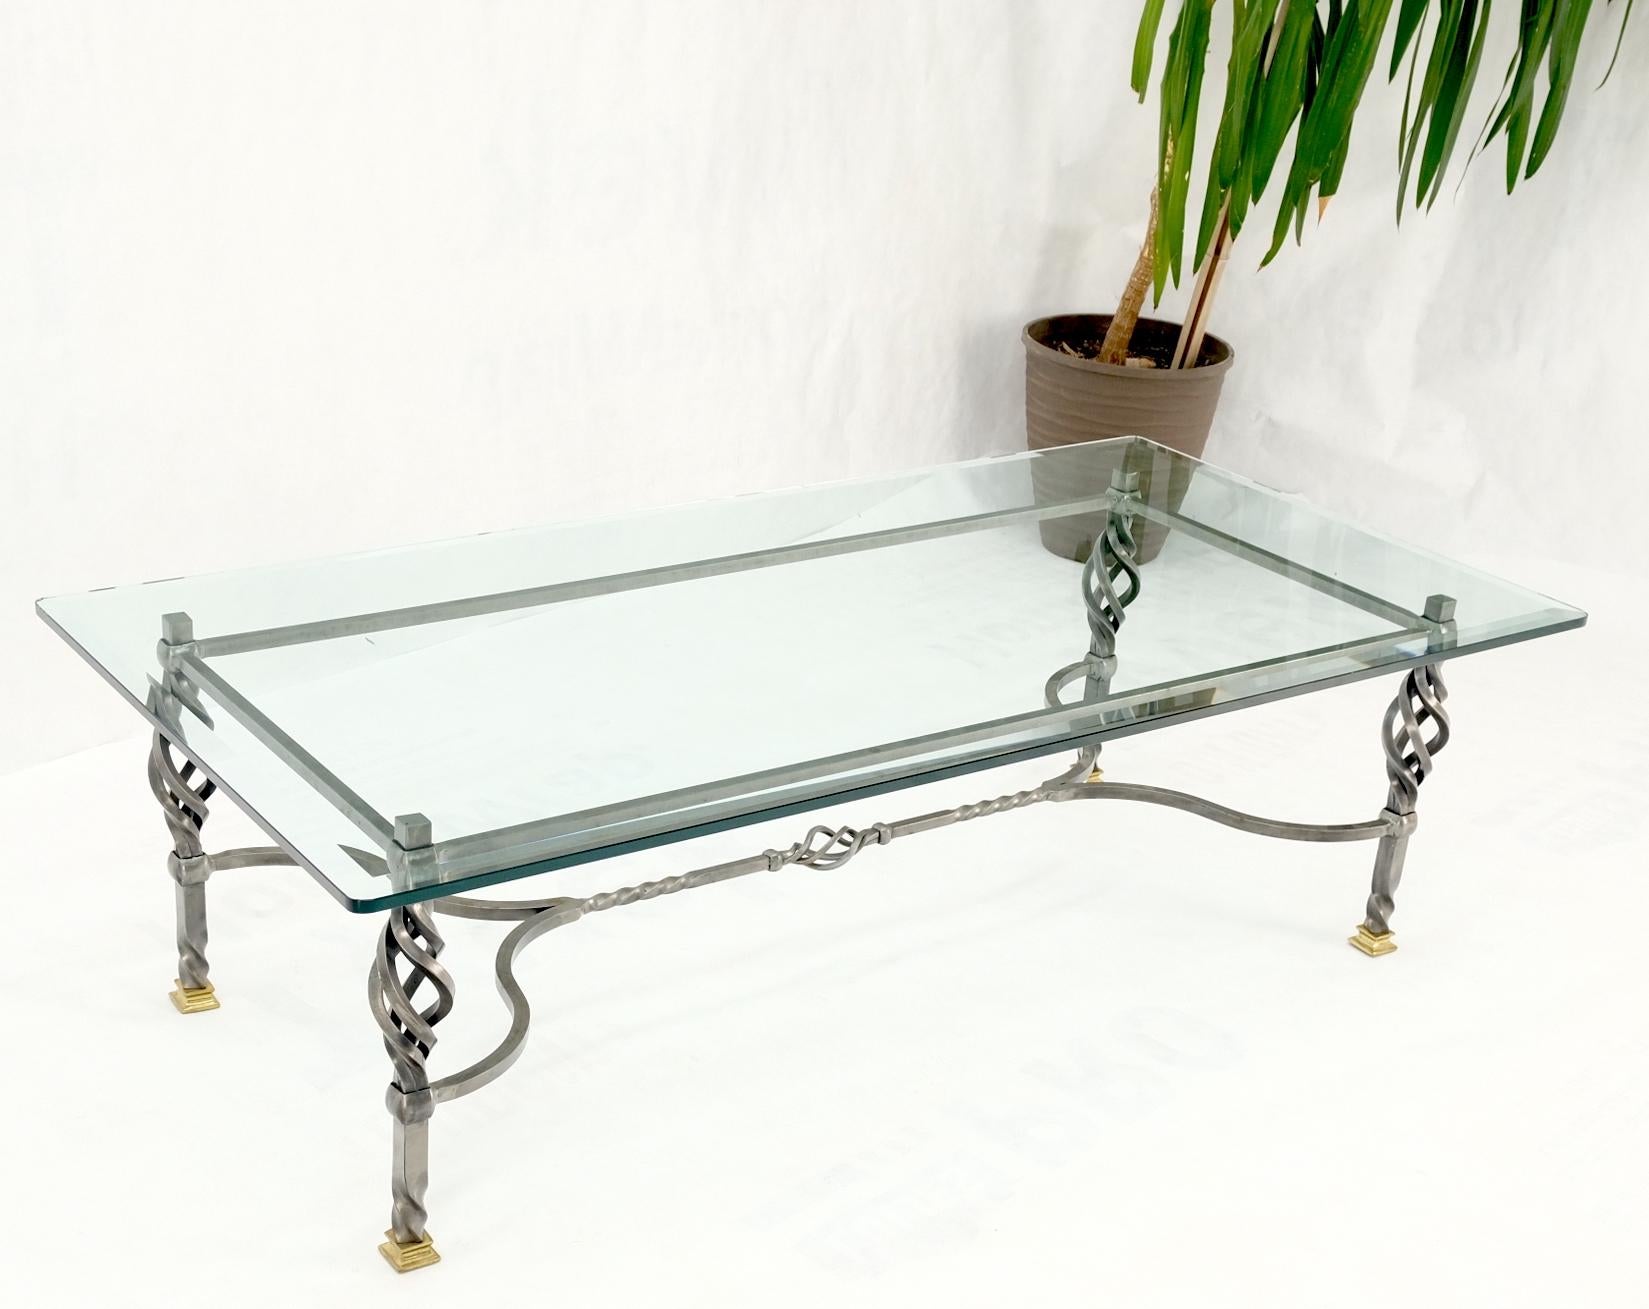 Wrought Iron Art Ornament Brass Tips Feet Glass Top Rectangle Coffee Table MINT For Sale 8